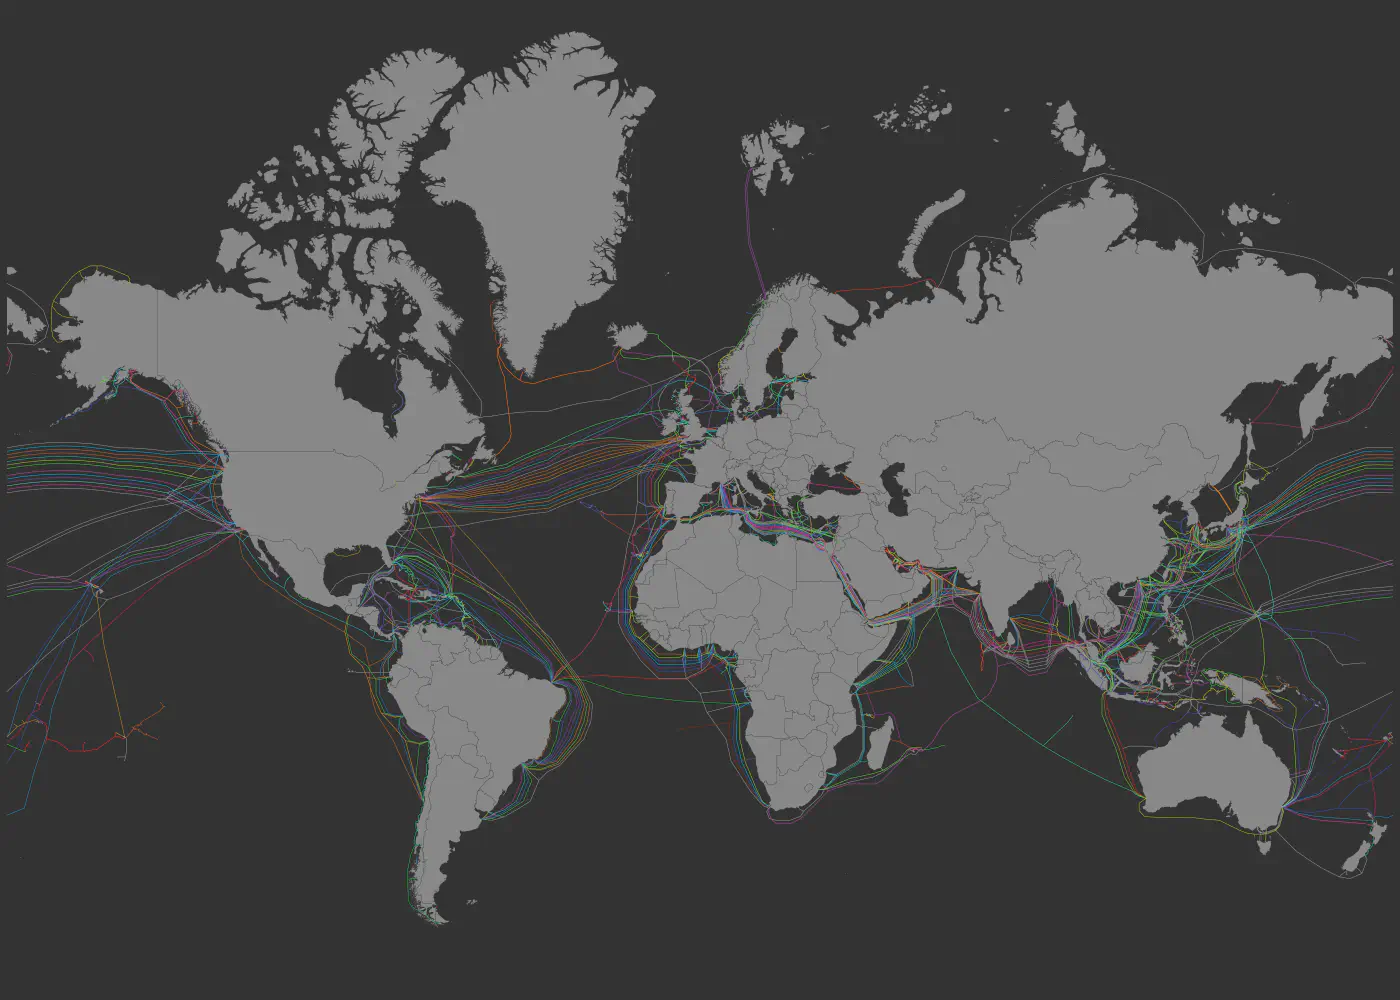 Map of the Internet (underwater cables)